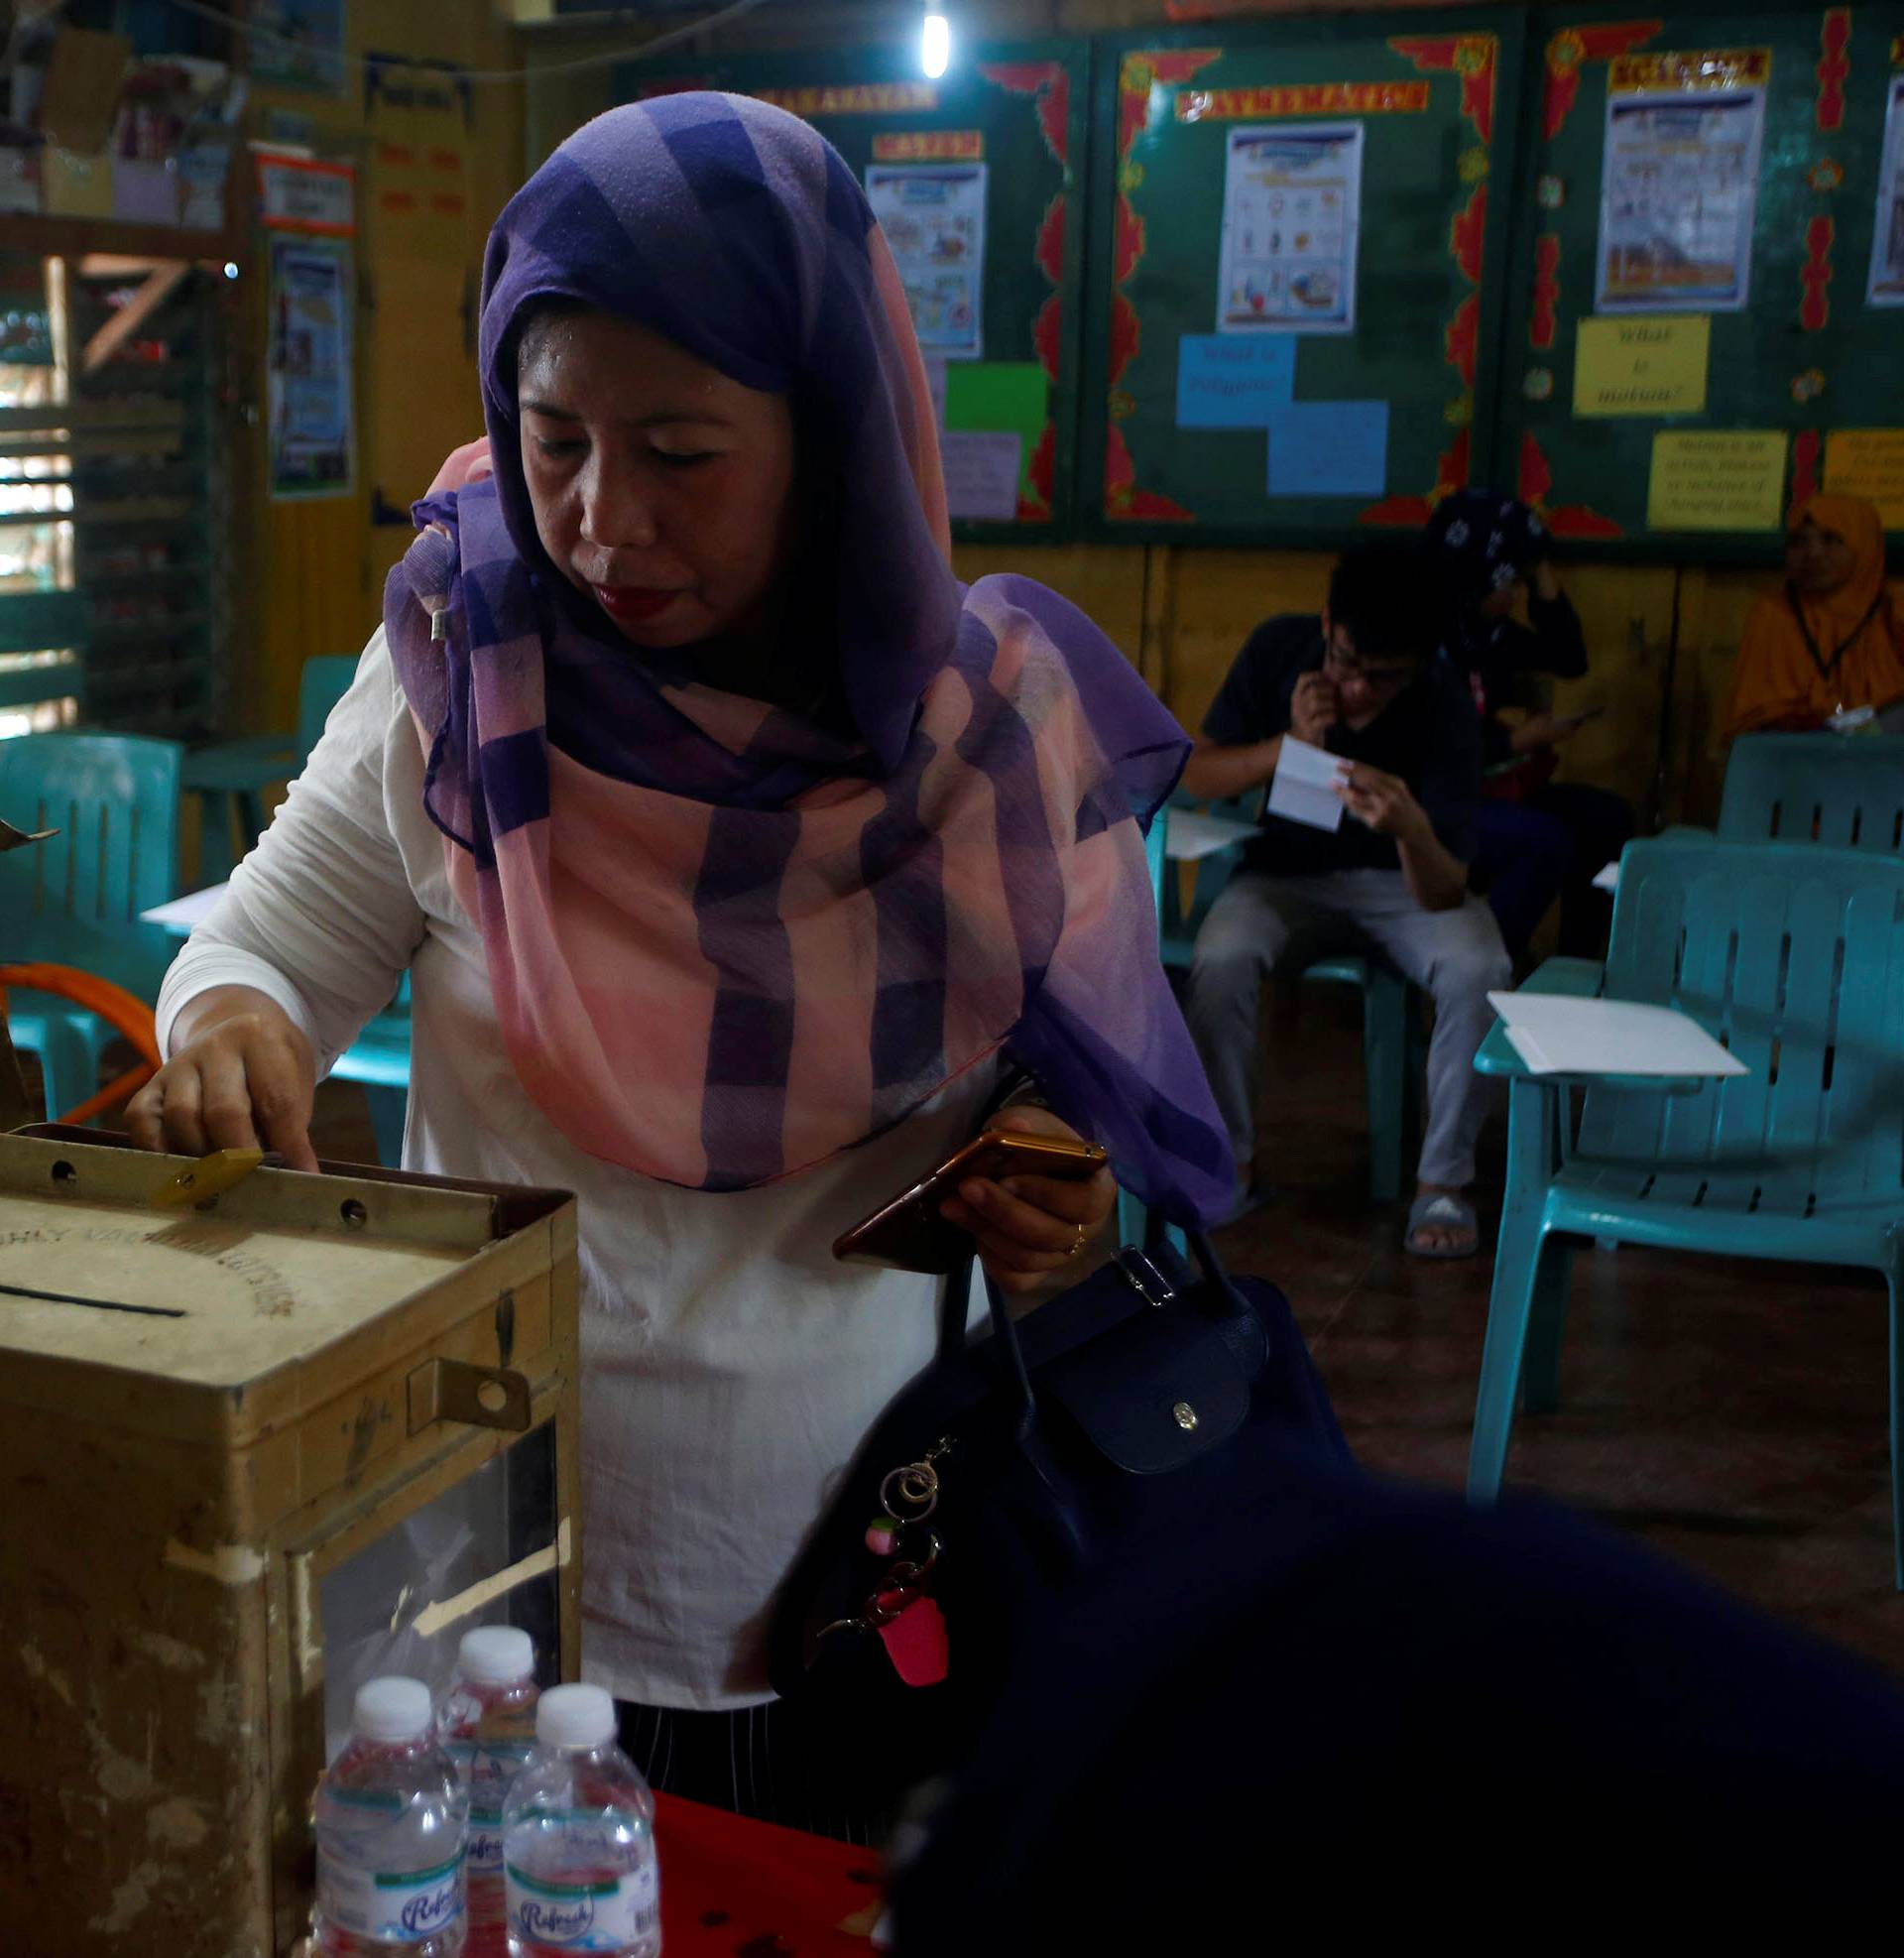 Woman casts her vote during the plebiscite on BOL at a voting precinct in Sultan Kudarat